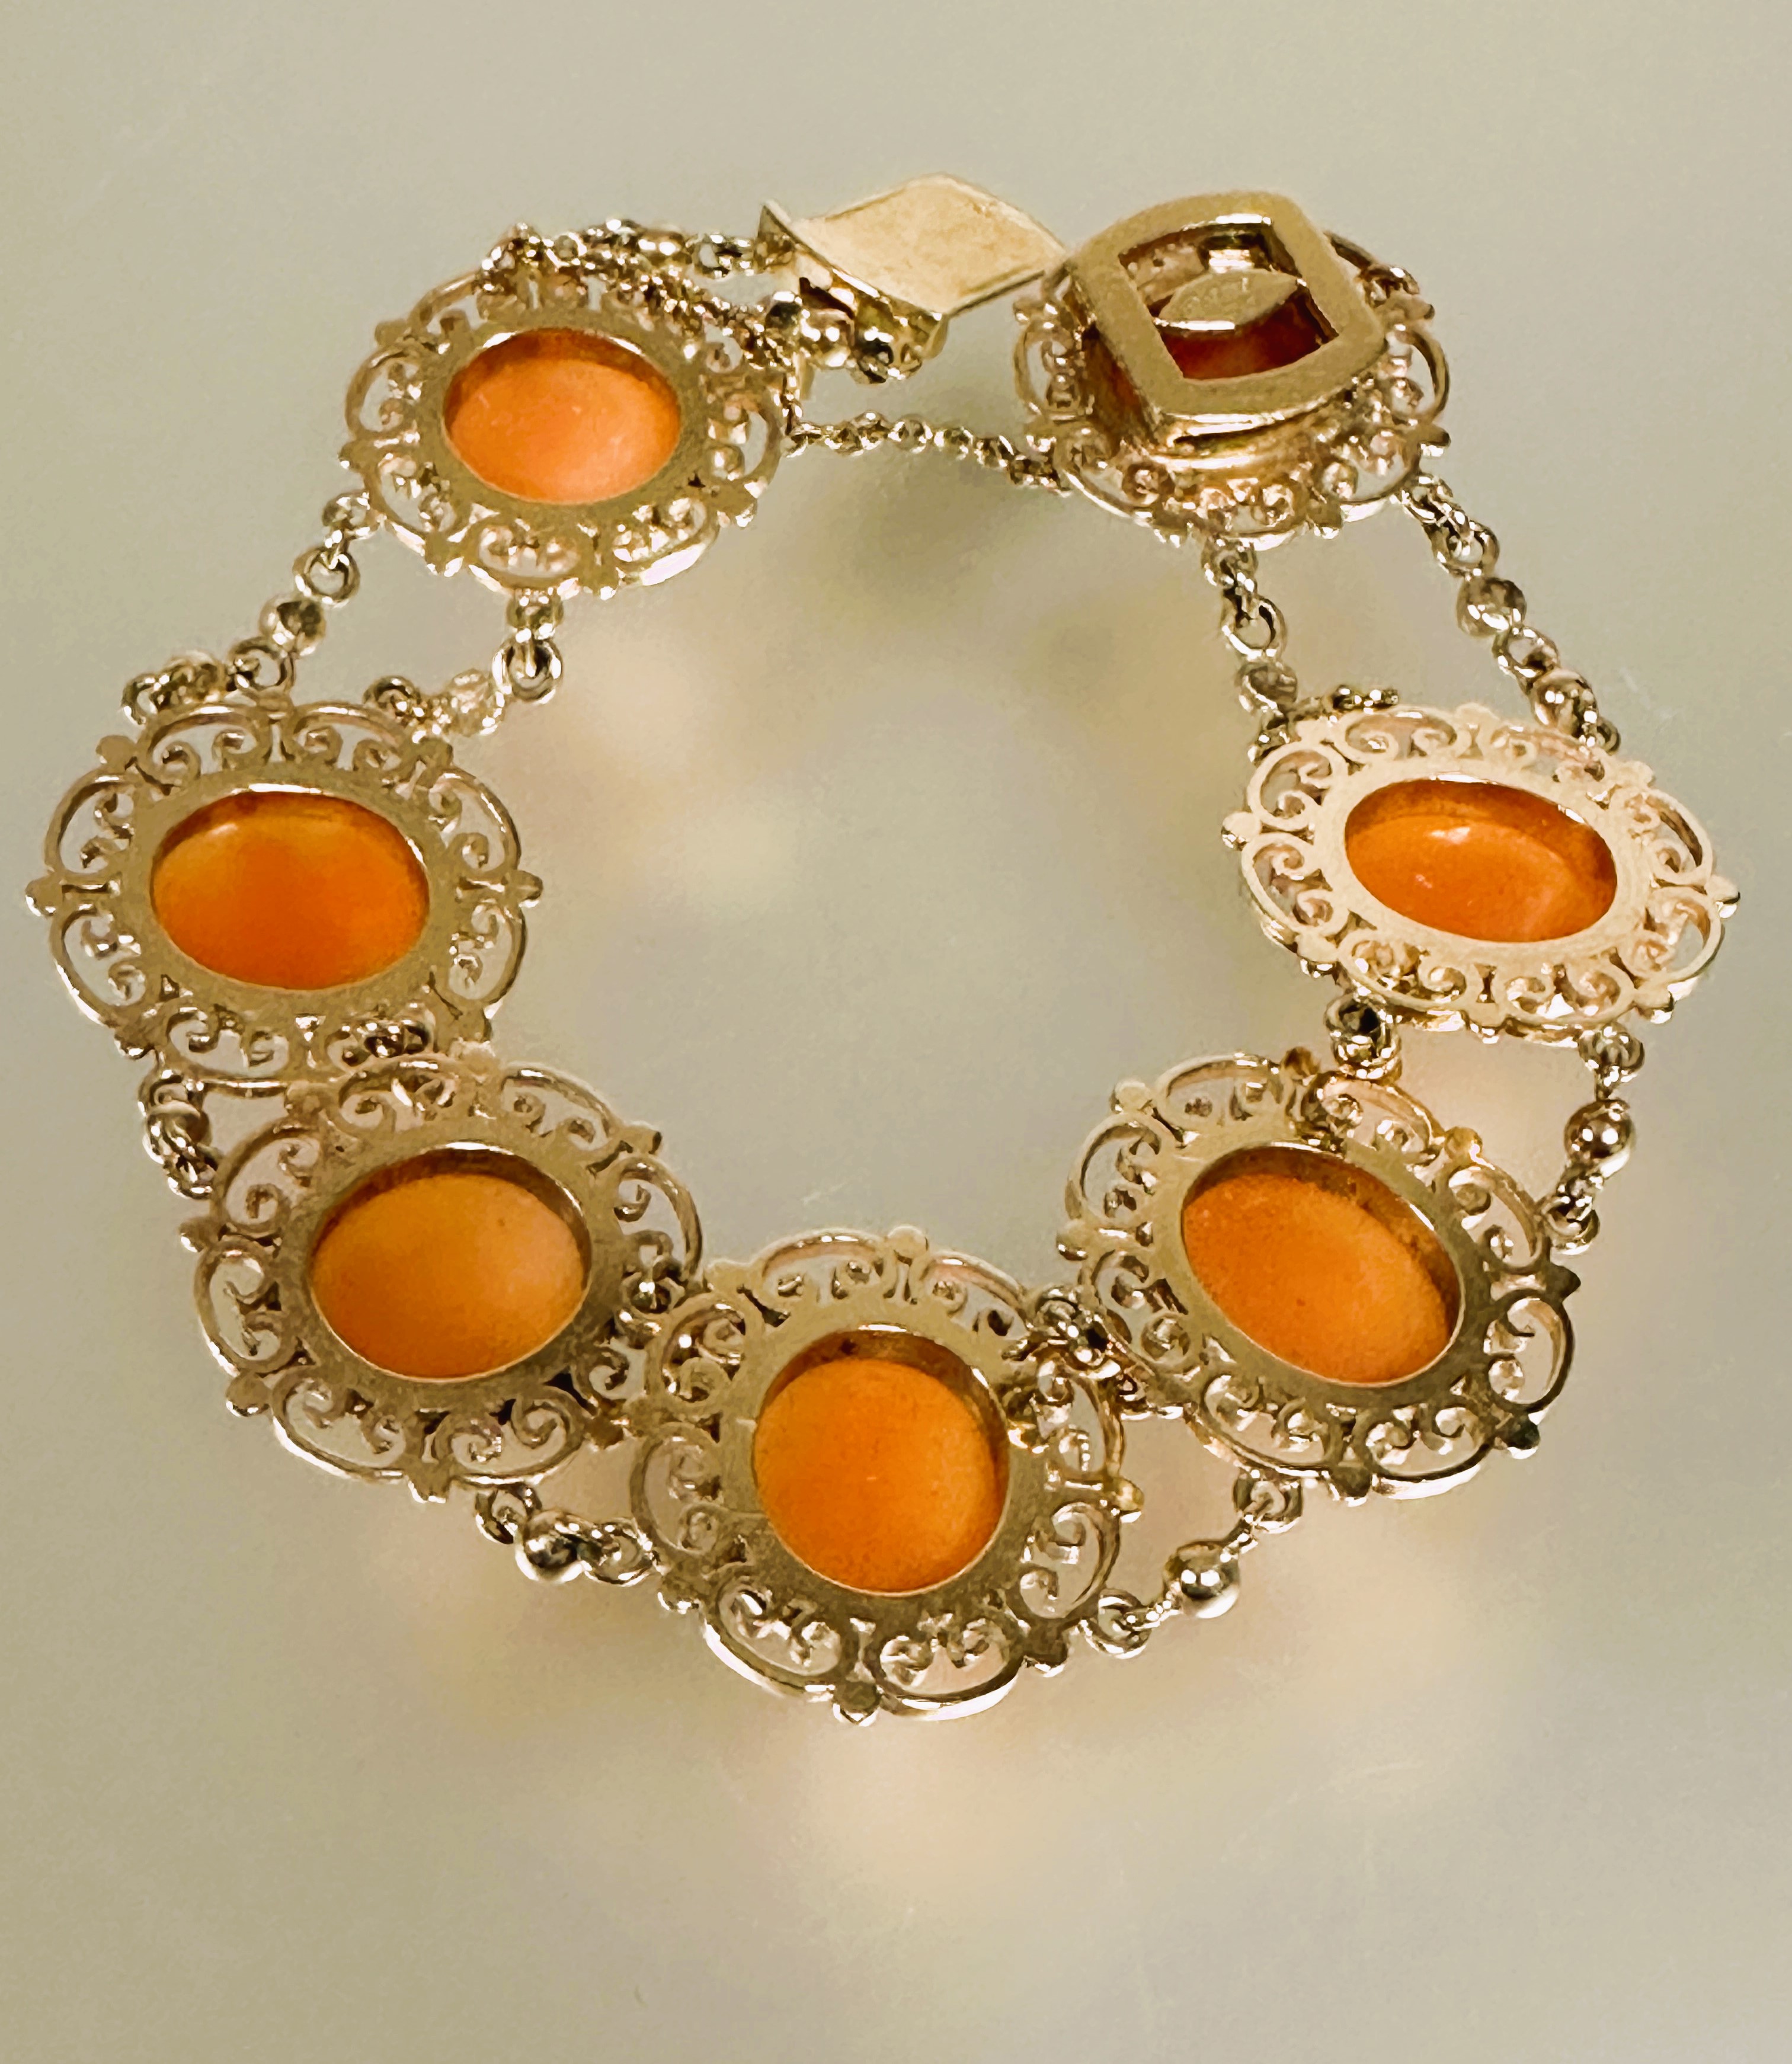 A 9ct gold bracelet set seven shell carved cameos in scrolling open work setting between chain - Image 2 of 4